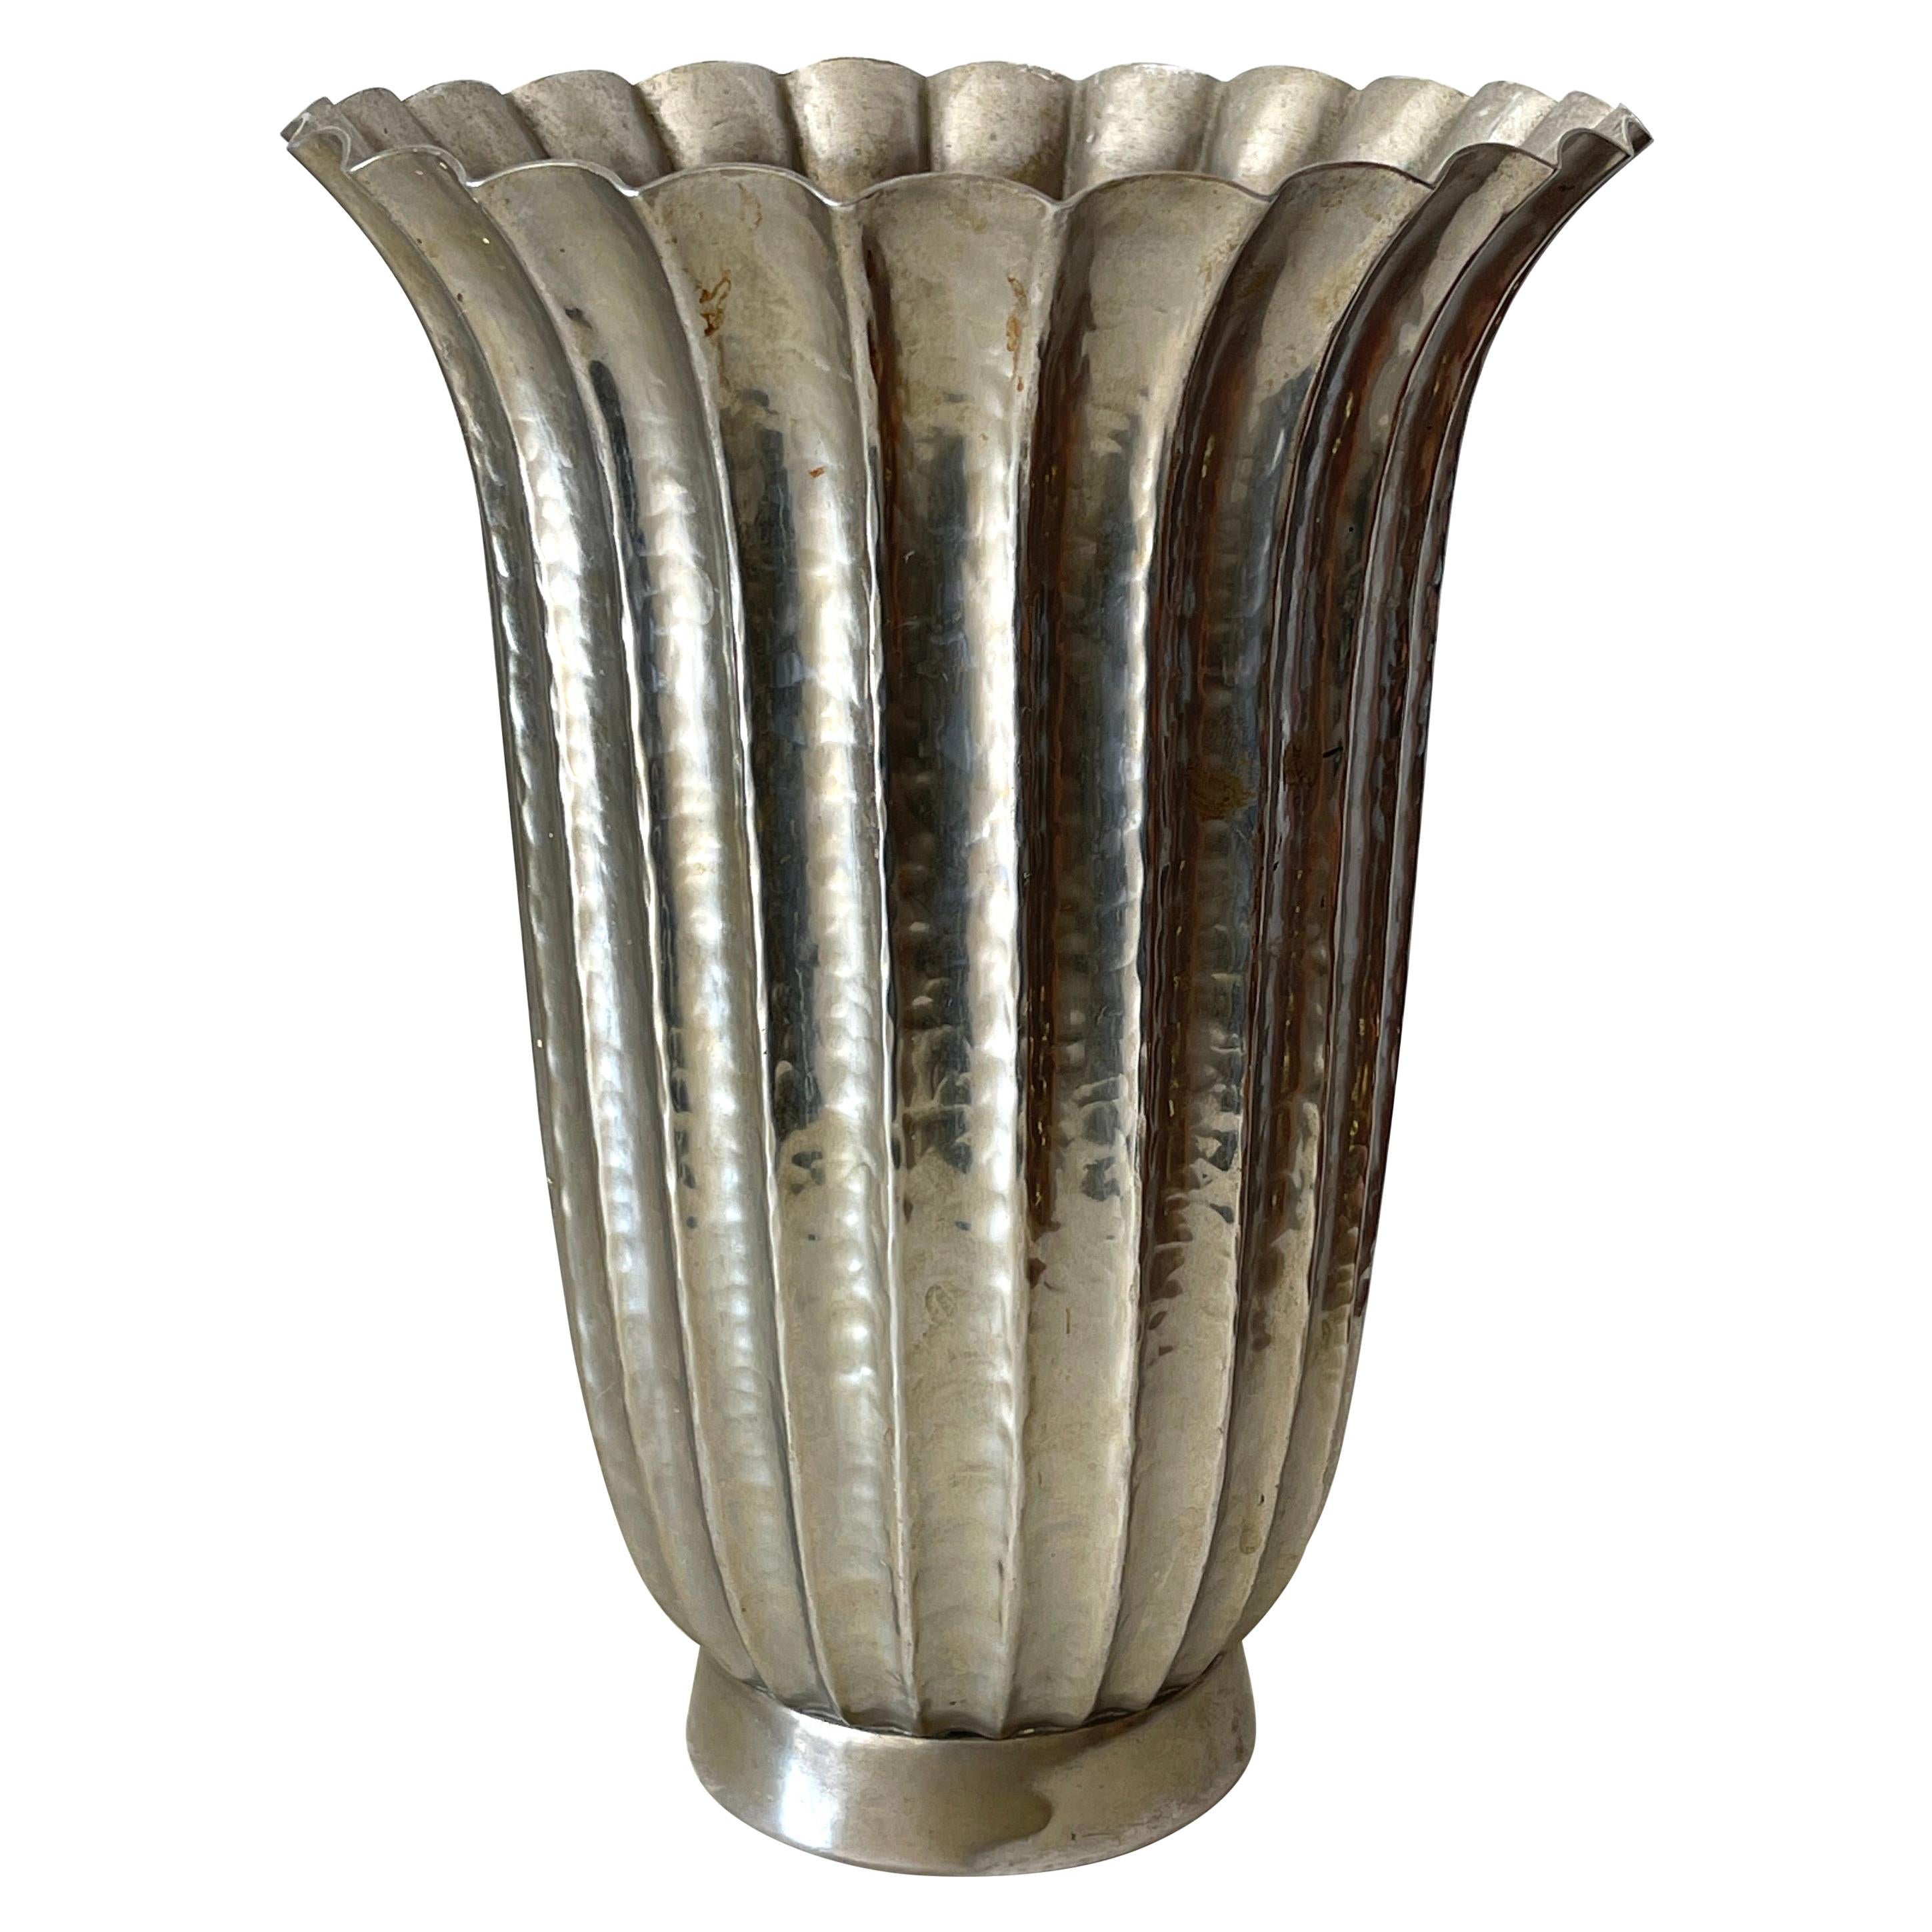 Viennese Secessionist Style Fluted Vase